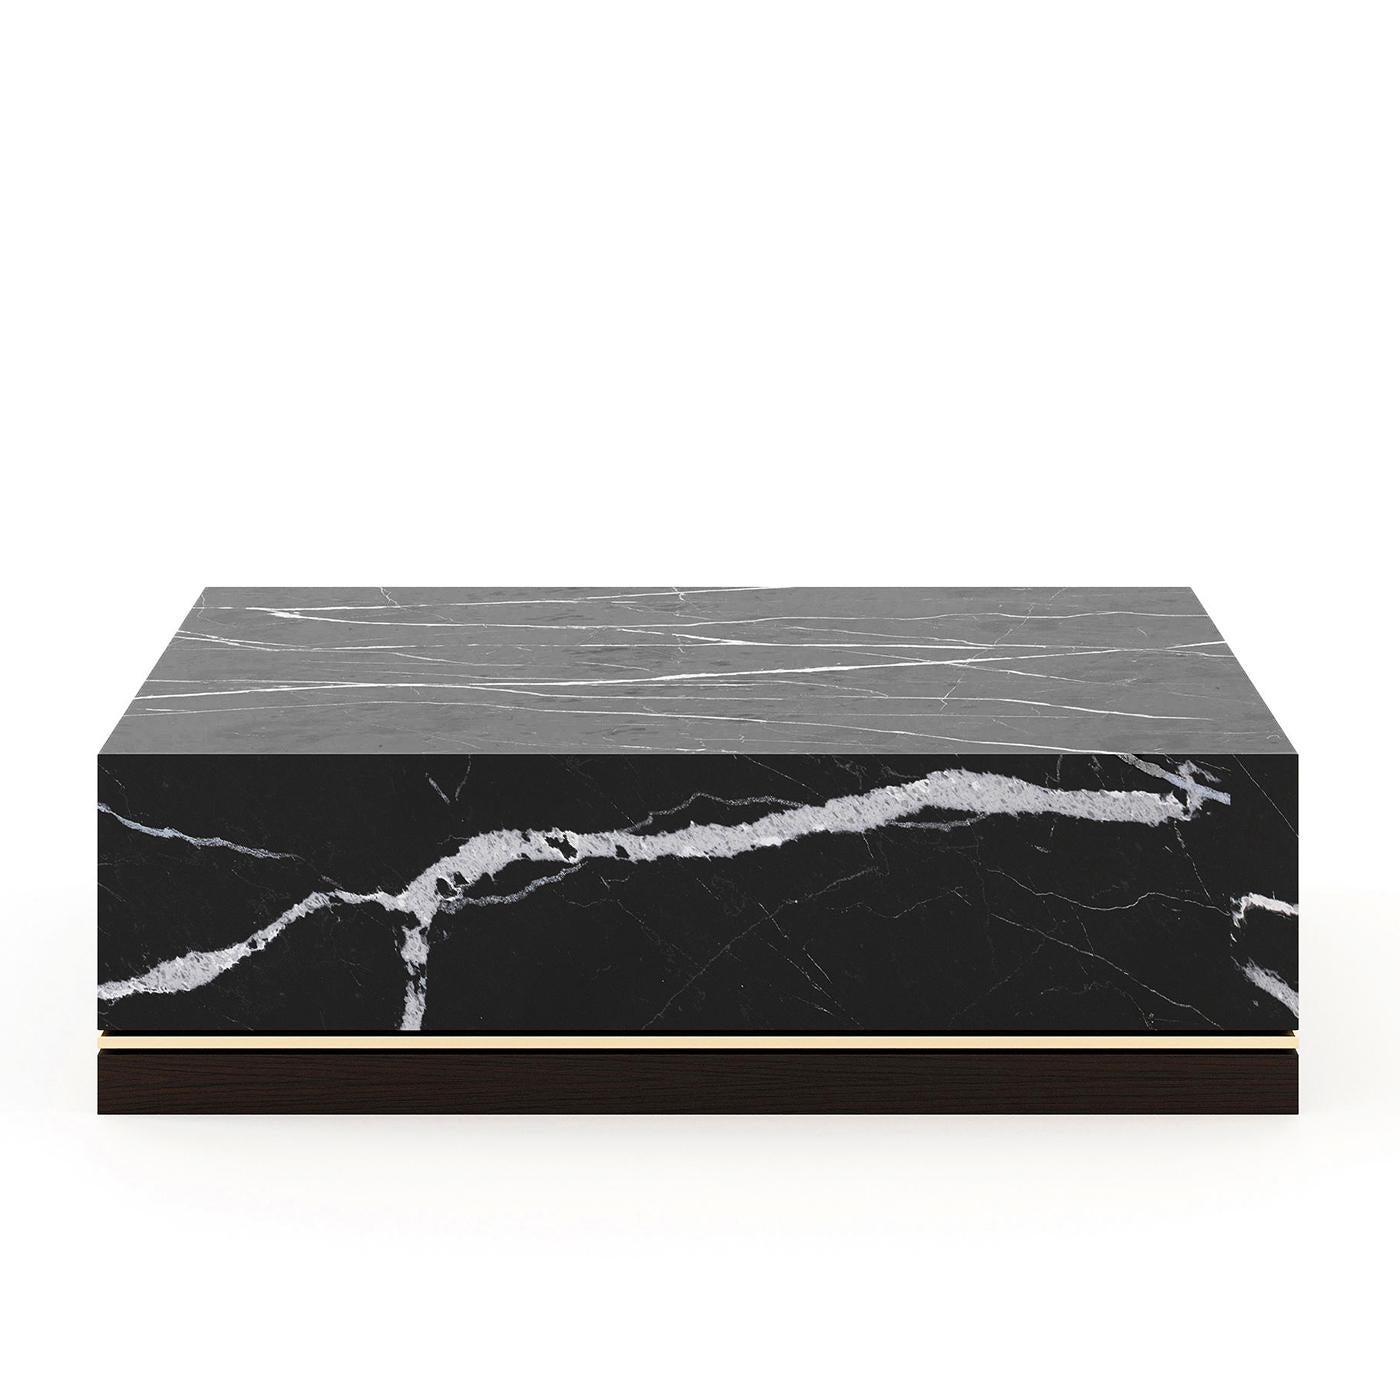 Coffee table Adamo with wooden structure and
with marble plates in black marble. With oak base
in smocked oak matte finish and with polished
stainless steel trim in gold finish.